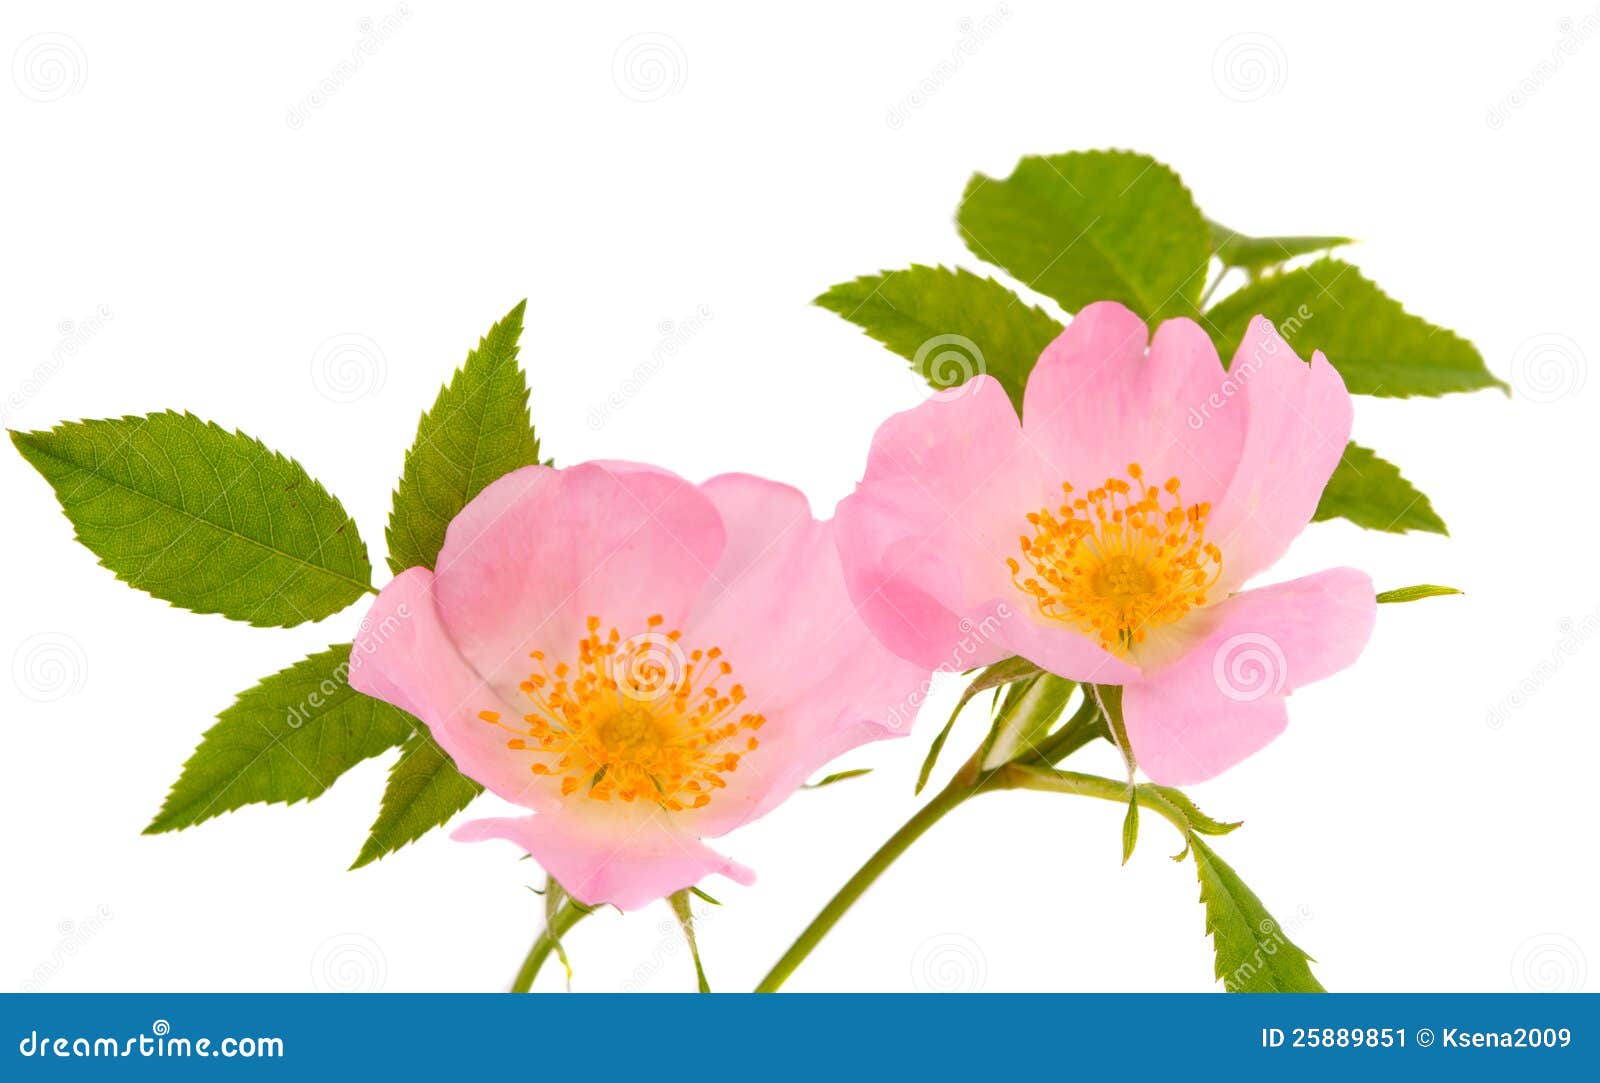 Flower hips isolated stock image. Image of leaf, petal - 25889851